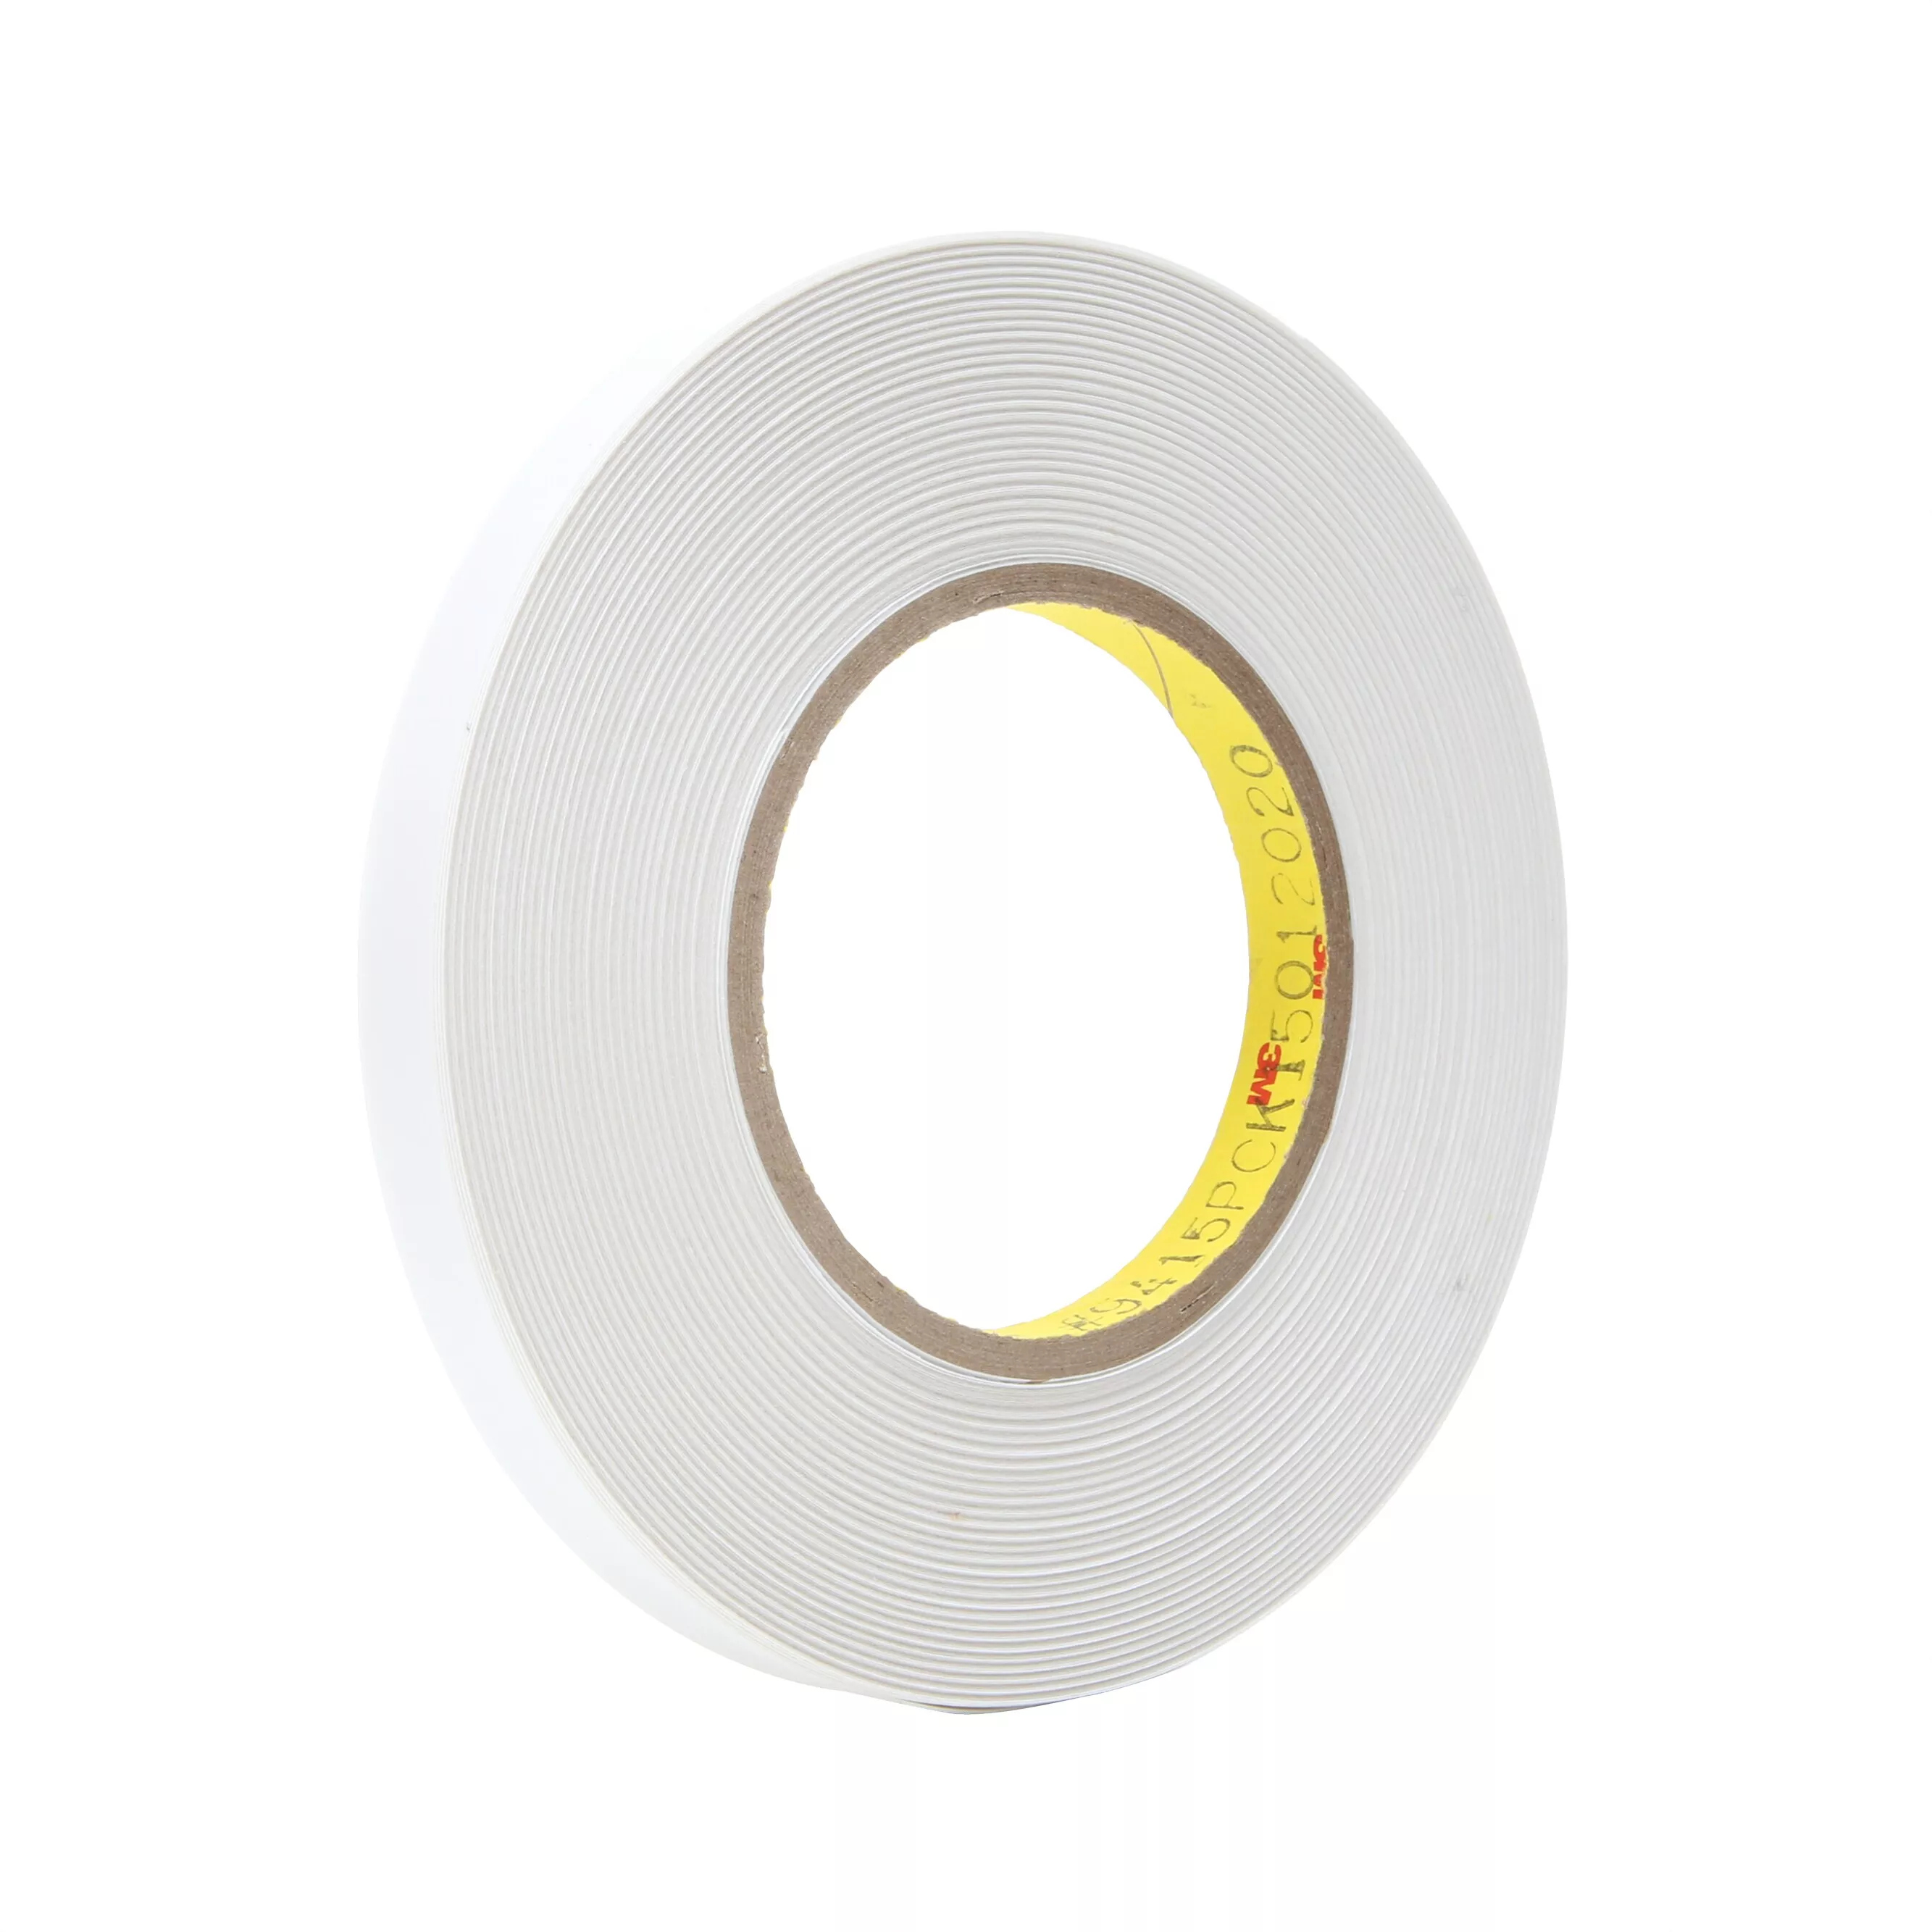 3M™ Removable Repositionable Tape 9415PC, Clear, 2 in x 72 yd, 2 mil, 24
Rolls/Case